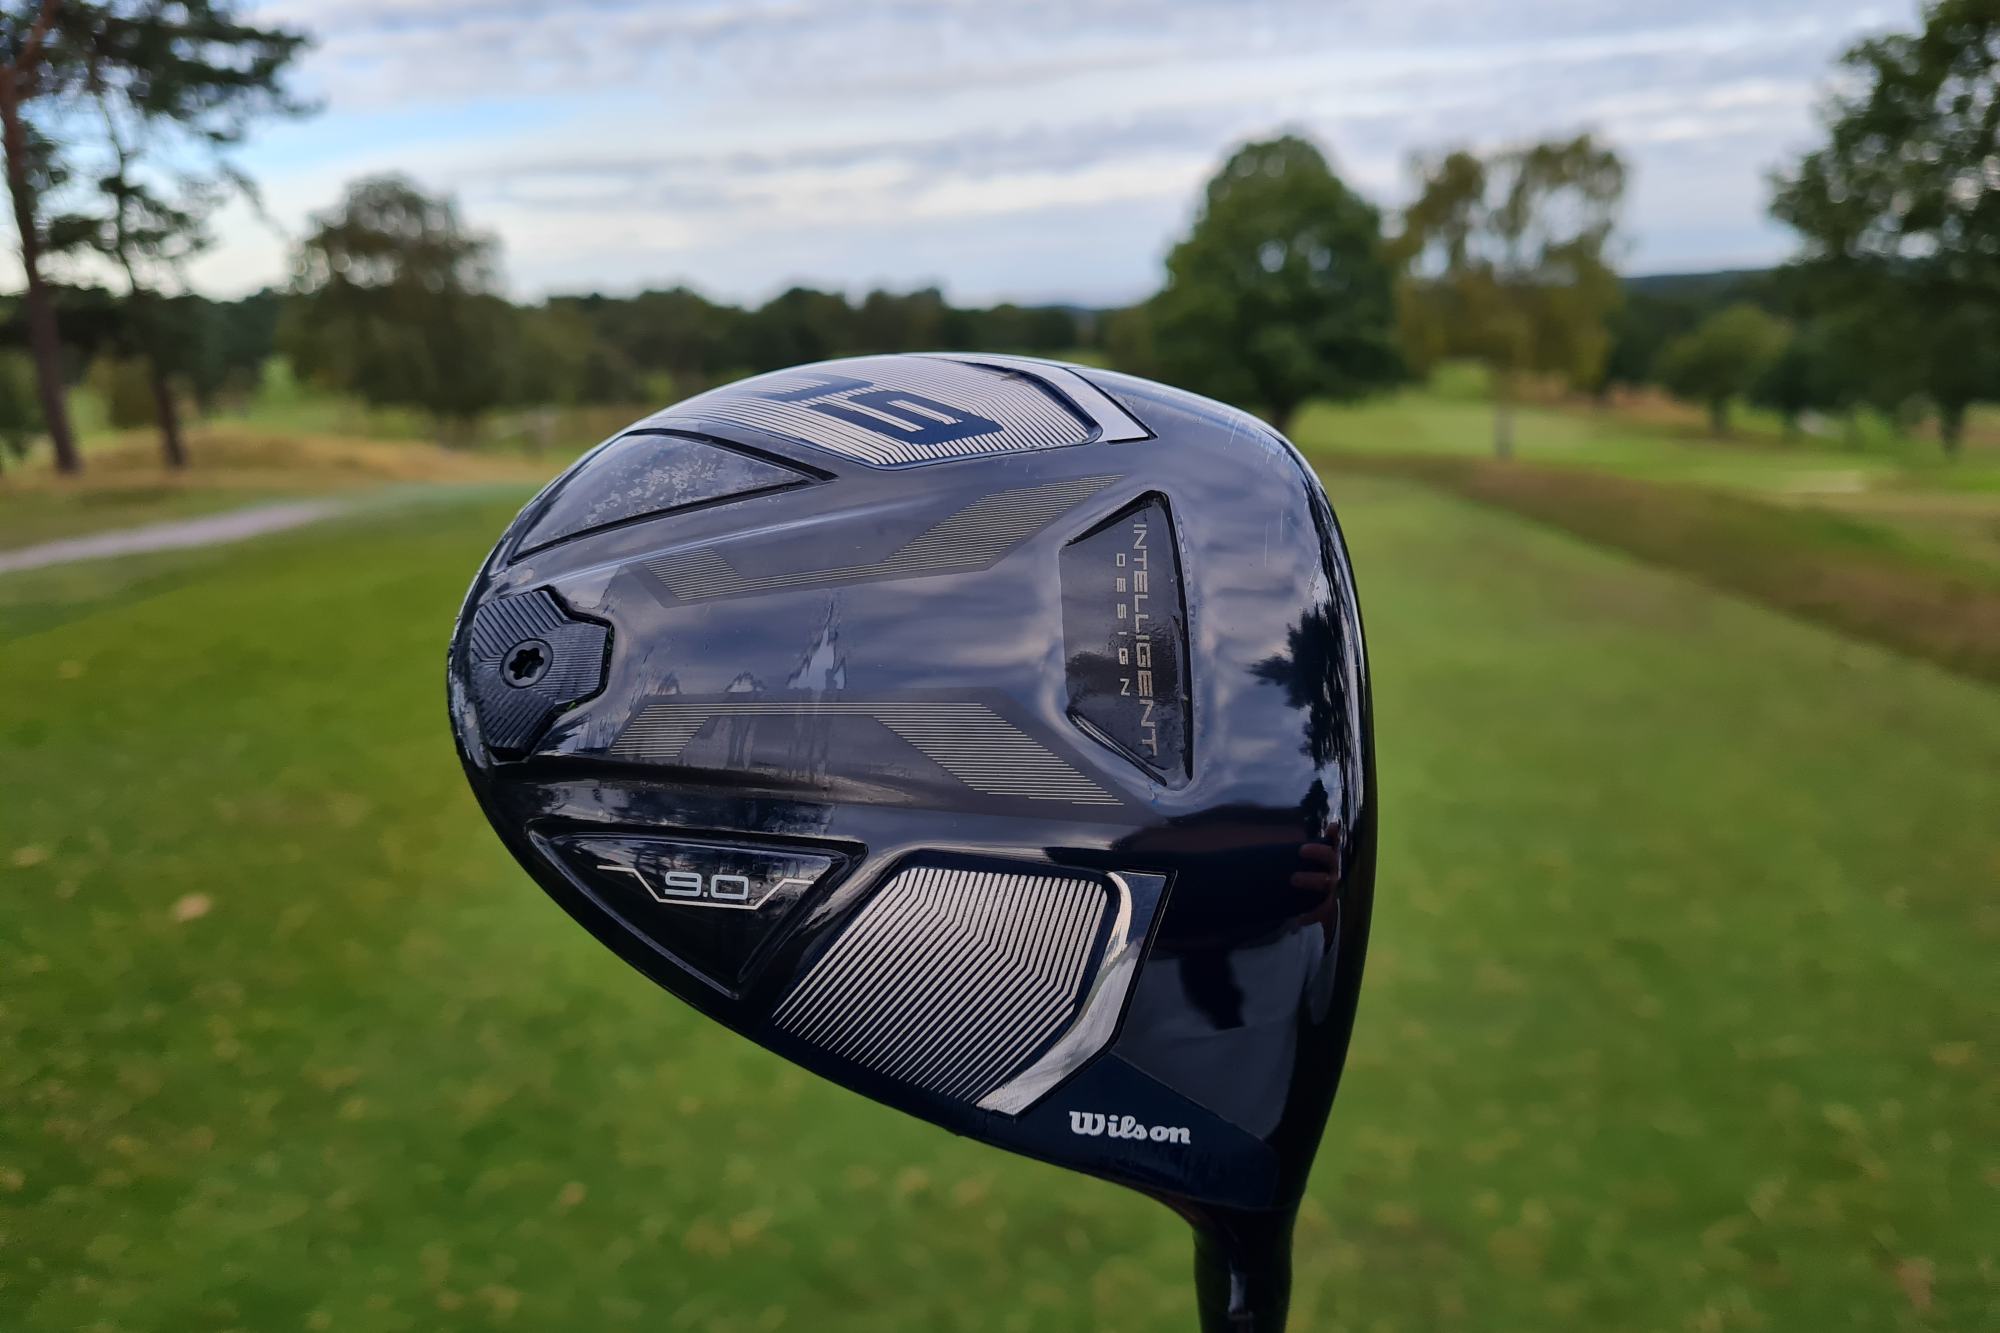 Wilson D9 driver review: How does it perform?